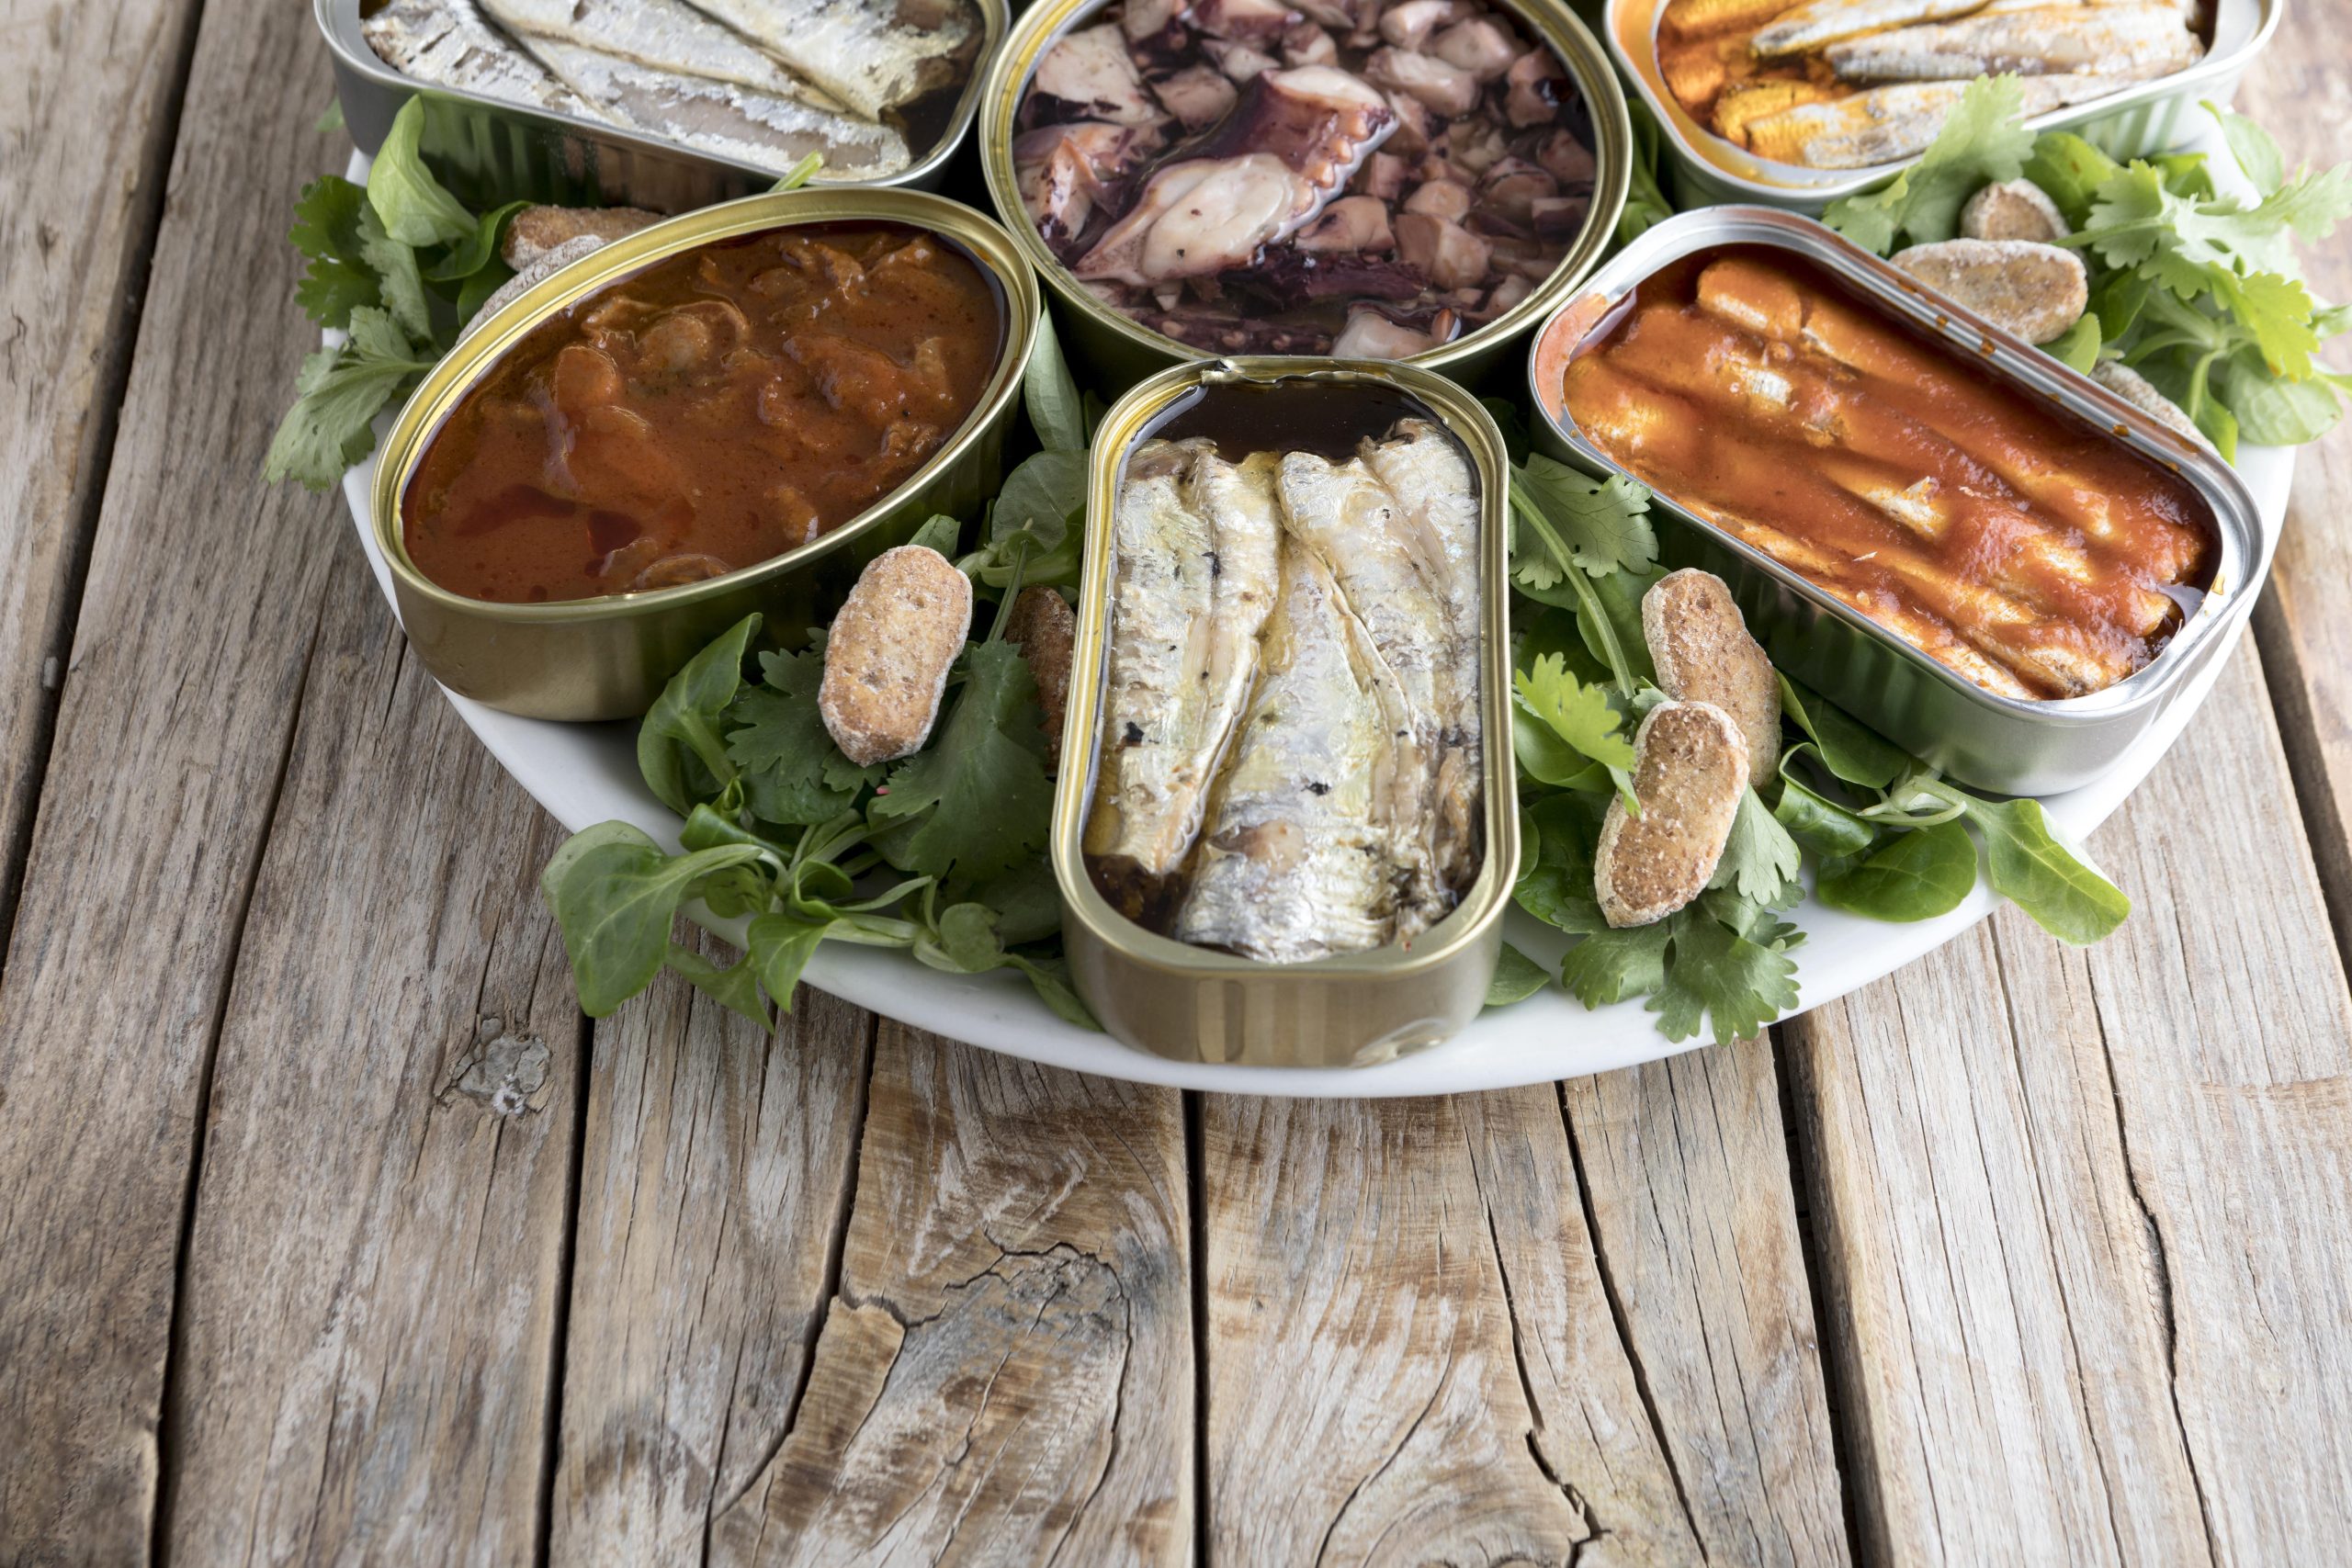 How many times a week should you eat tinned fish